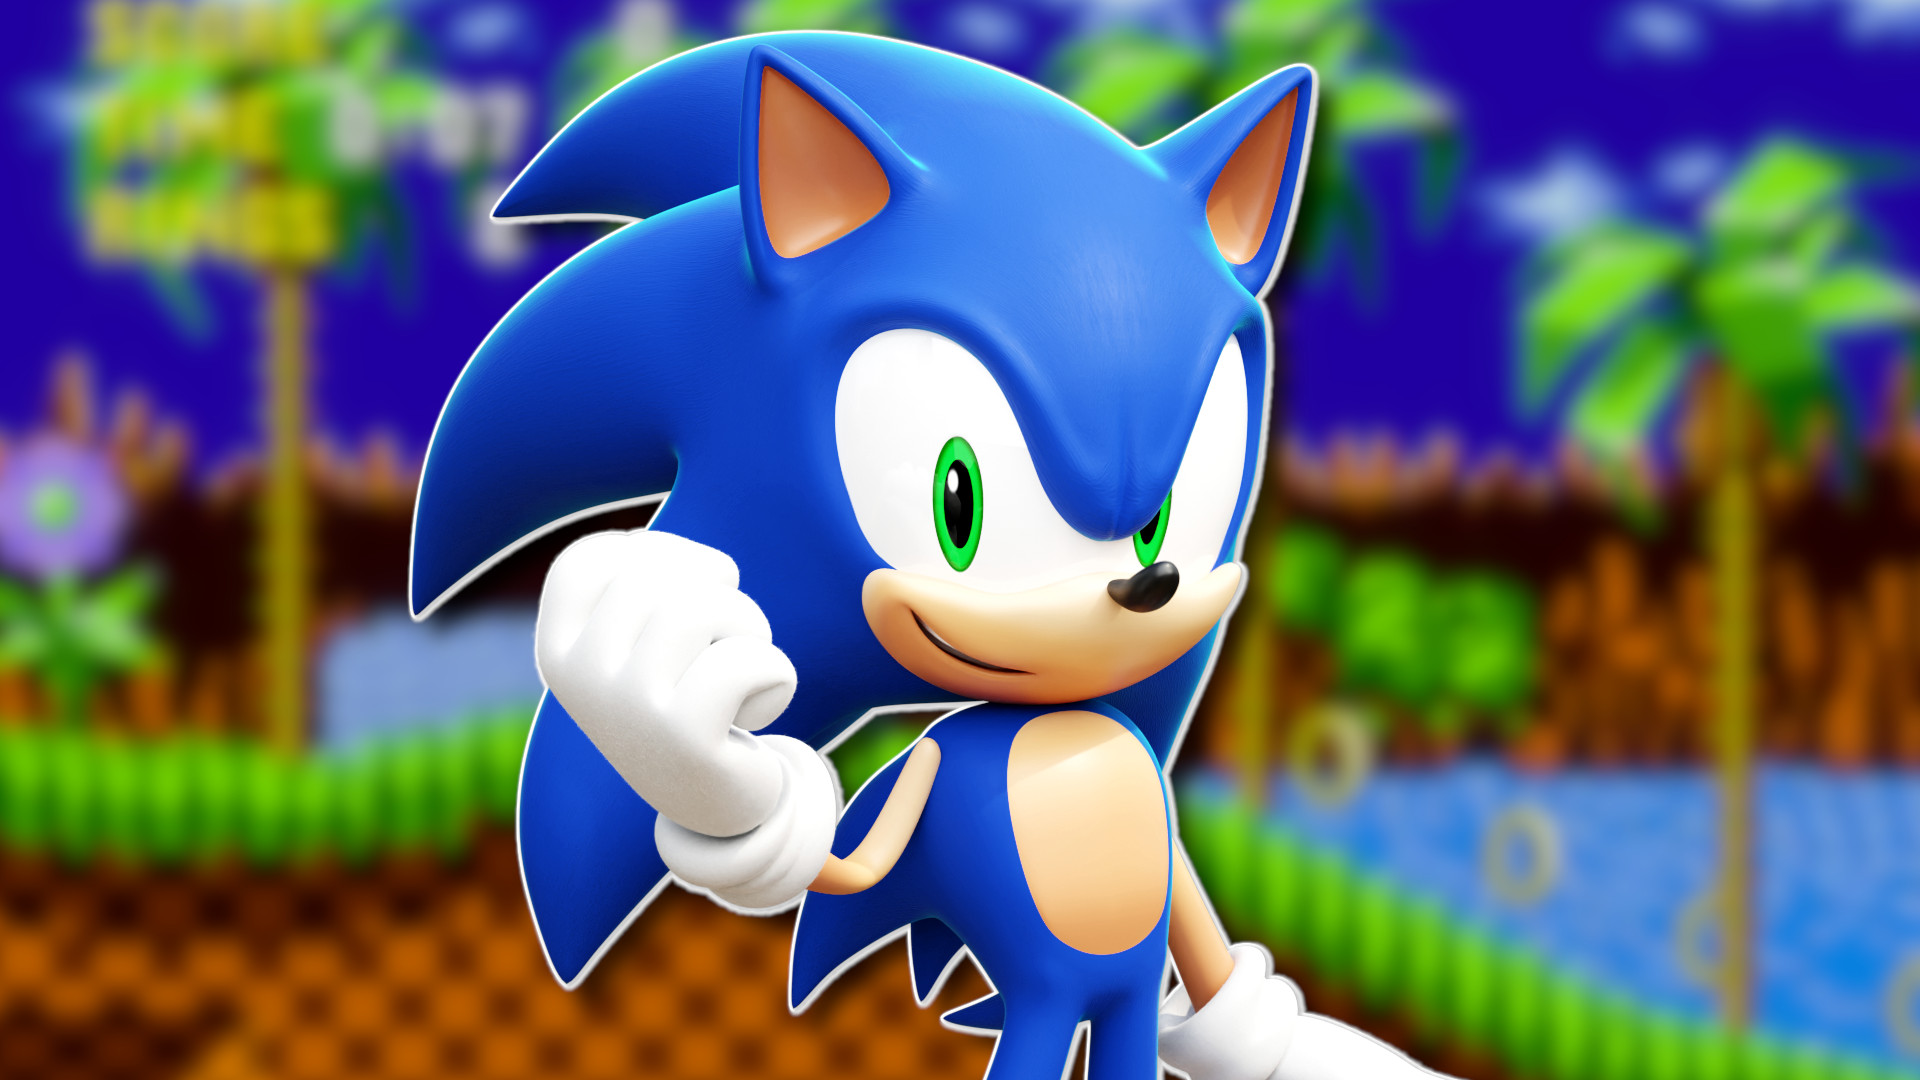 Sonic Frontiers Mobile - Open World Sonic Game on Android (Fan